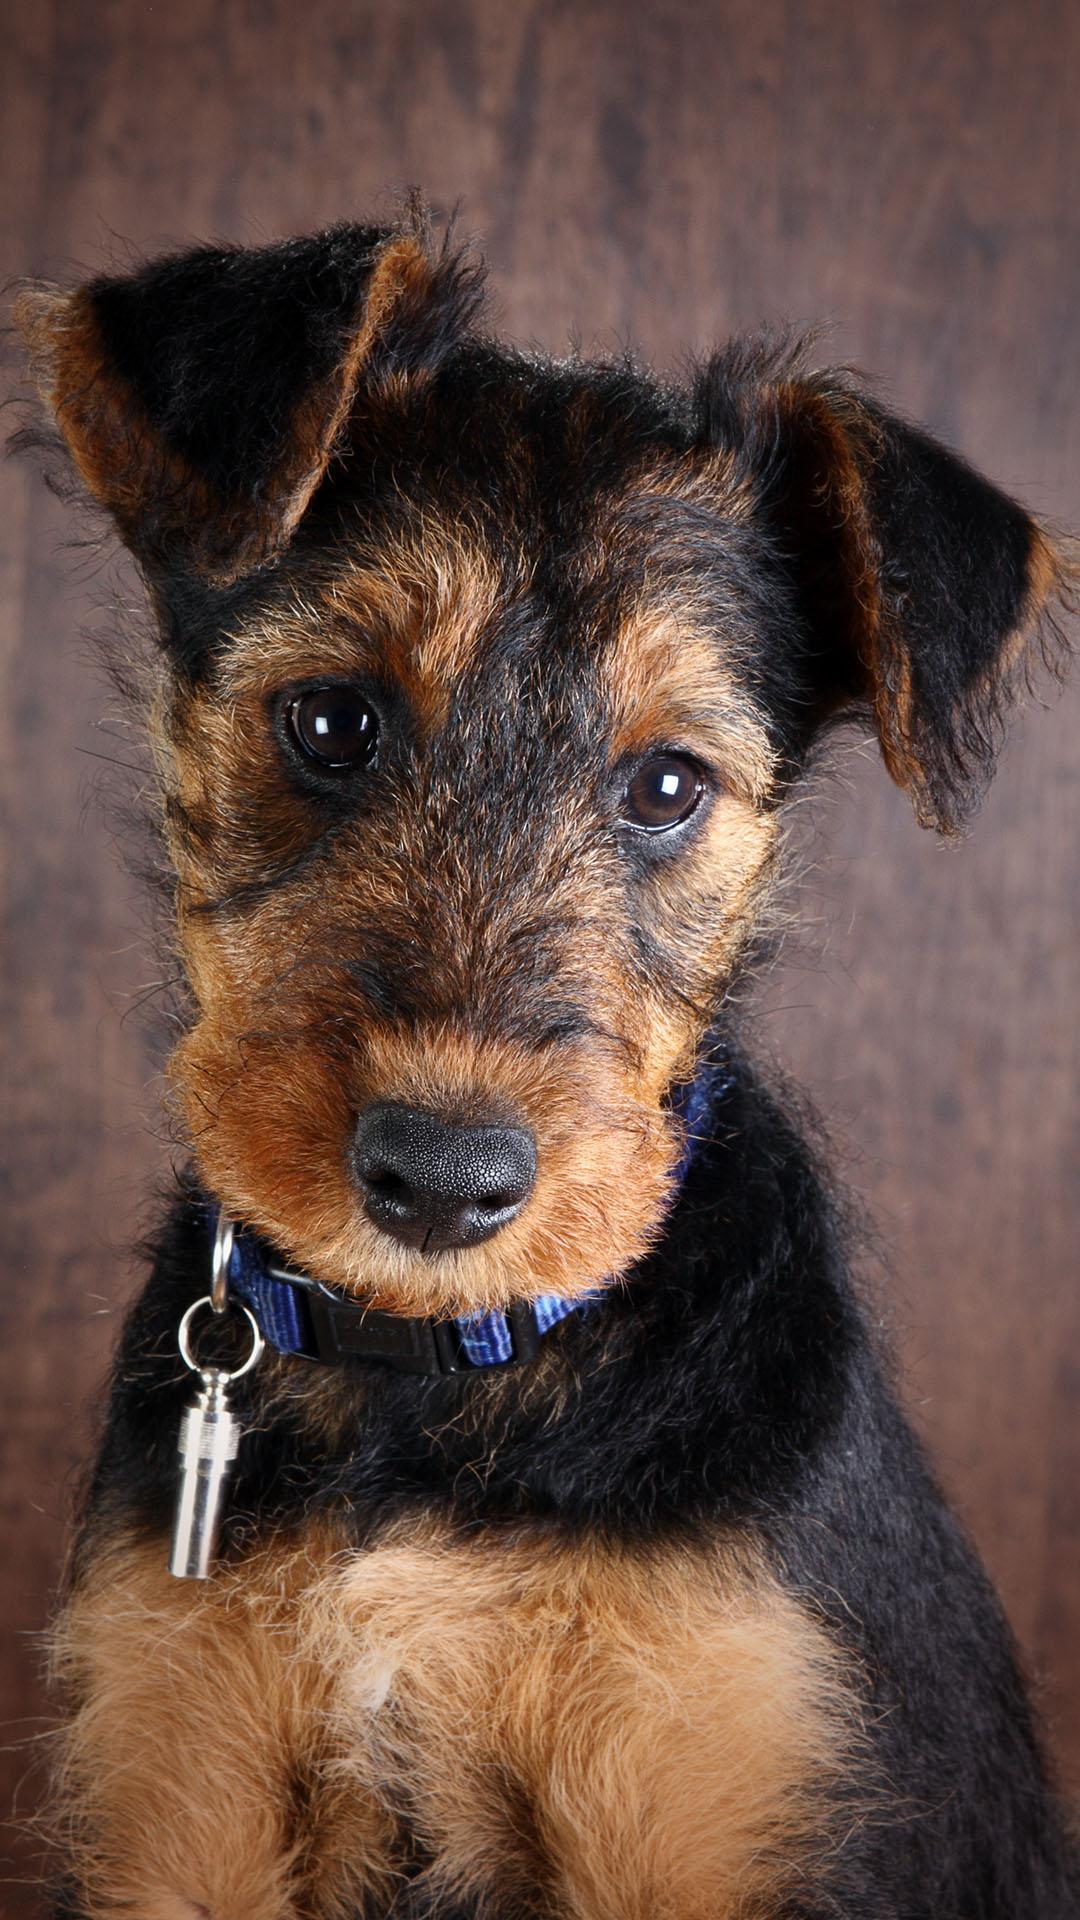 Airedale Terrier Wallpaper for Android   APK Download 1080x1920